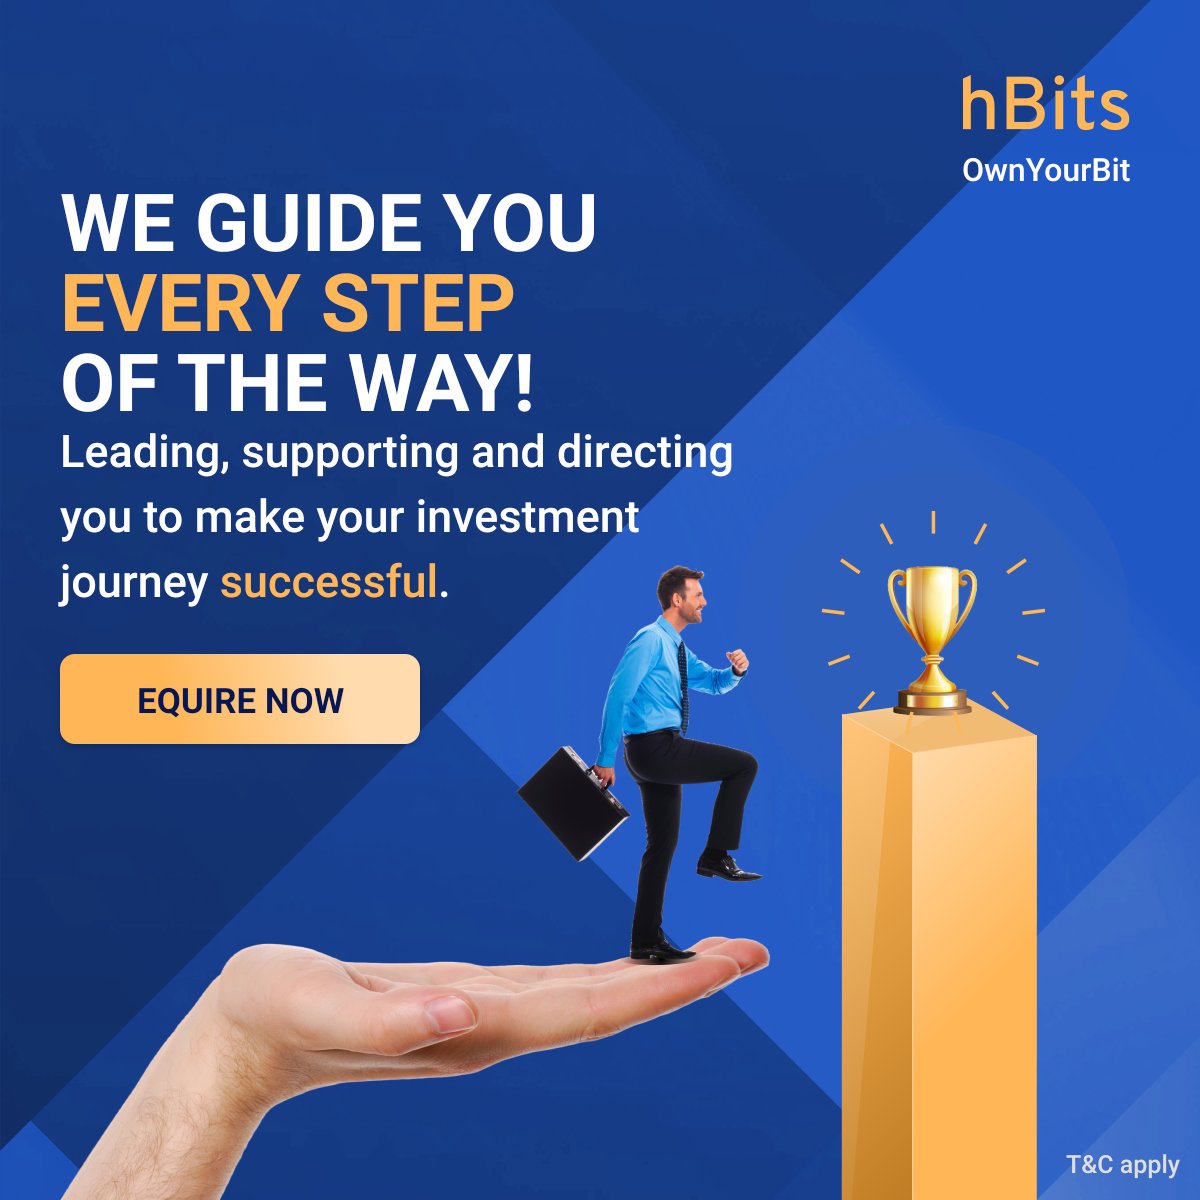 From your first hello to your last goodbye, we at hBits, pride ourselves in helping, guiding and supporting our customers through every step of the way. To know more, visit: hbits.co #hBits #ownyourbit #RealEstateInvestment #FractionalOwnership #investments